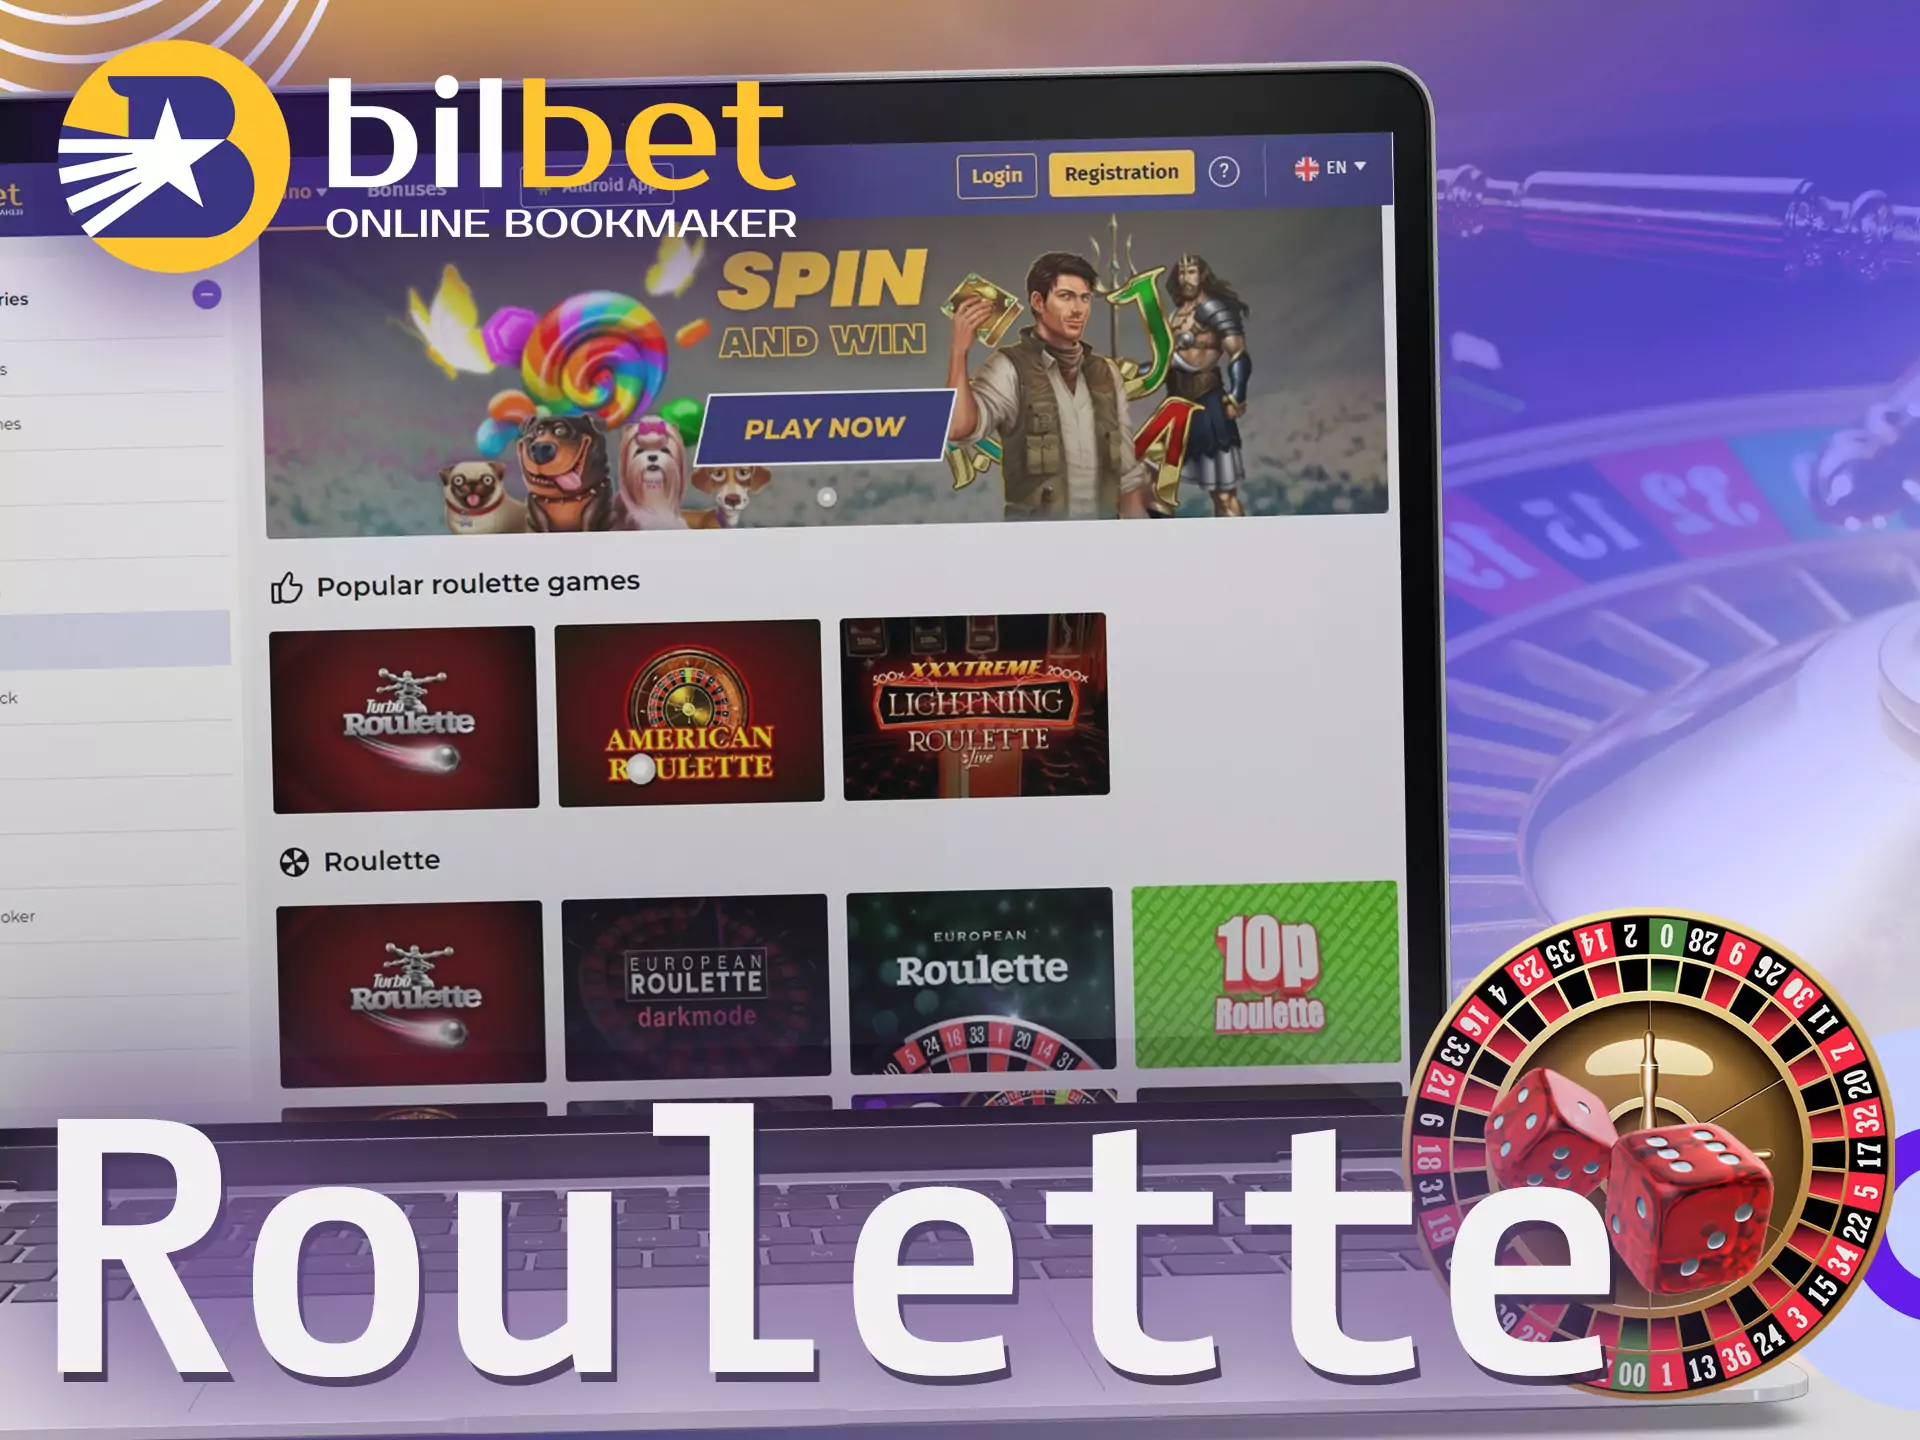 On the Bilbet website, you can play different types of roulette.